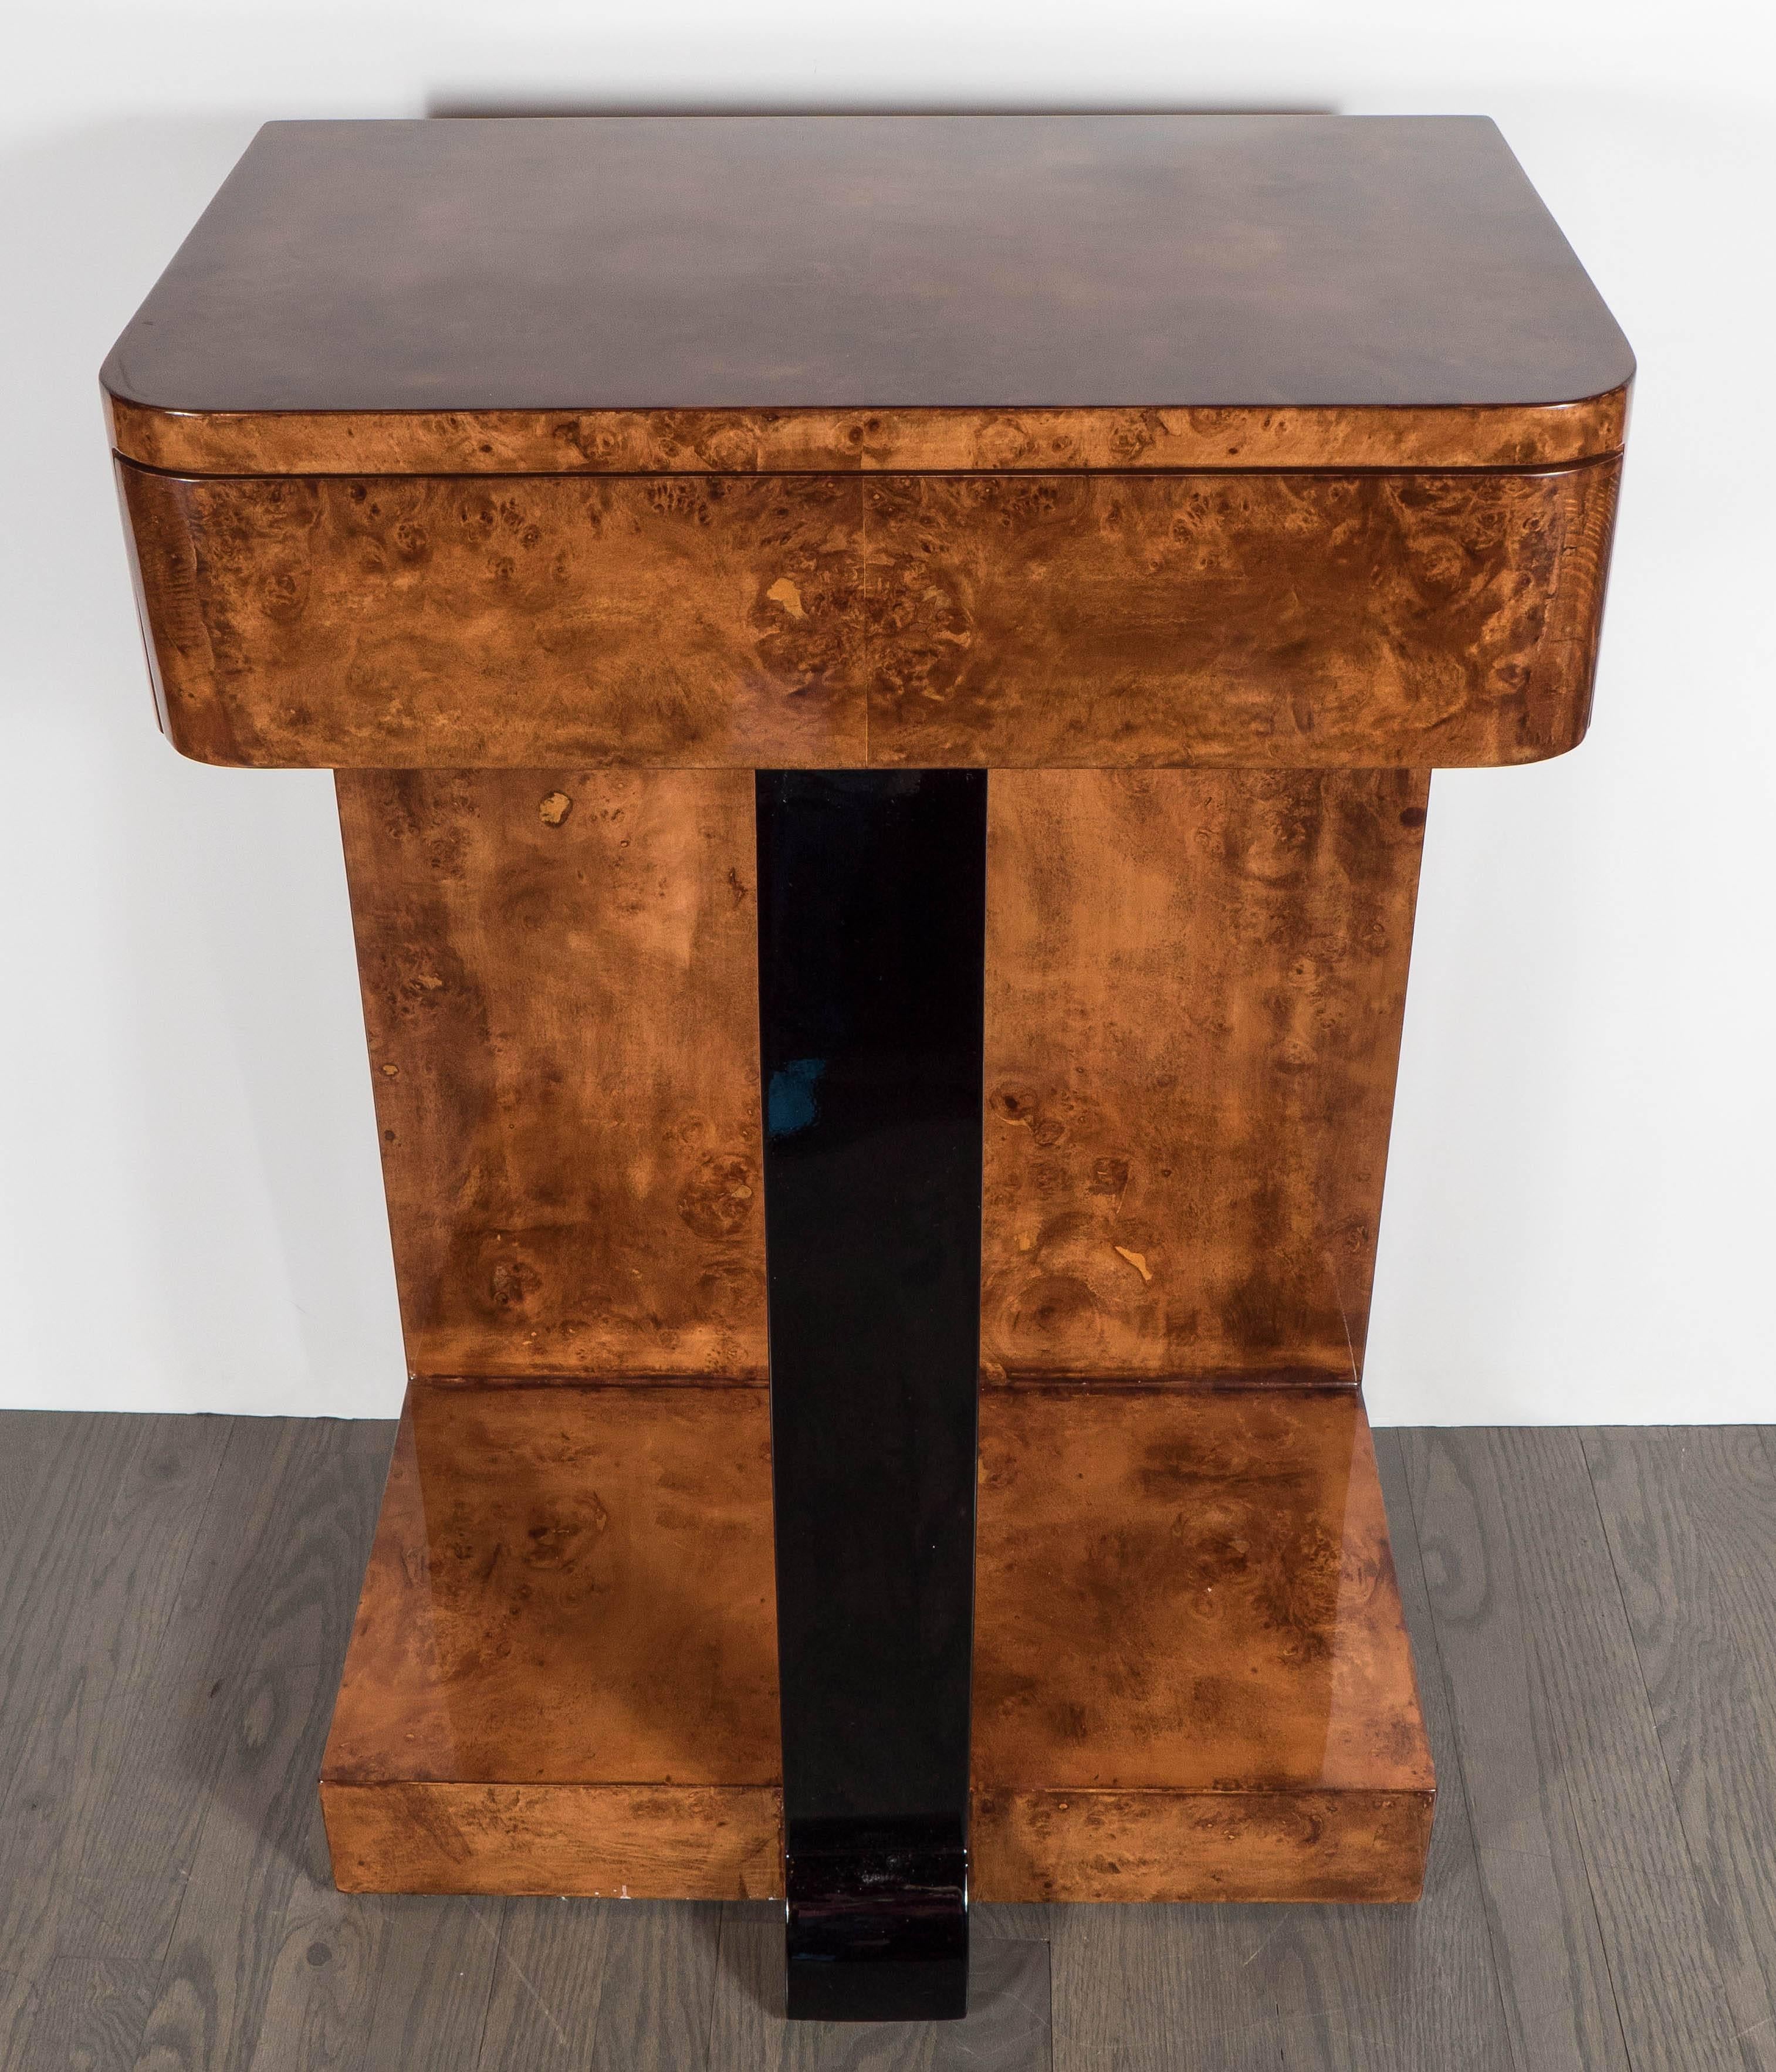 Lacquered Elegant Bookmatched Burled Carpathian Elm Side Table with Drawer